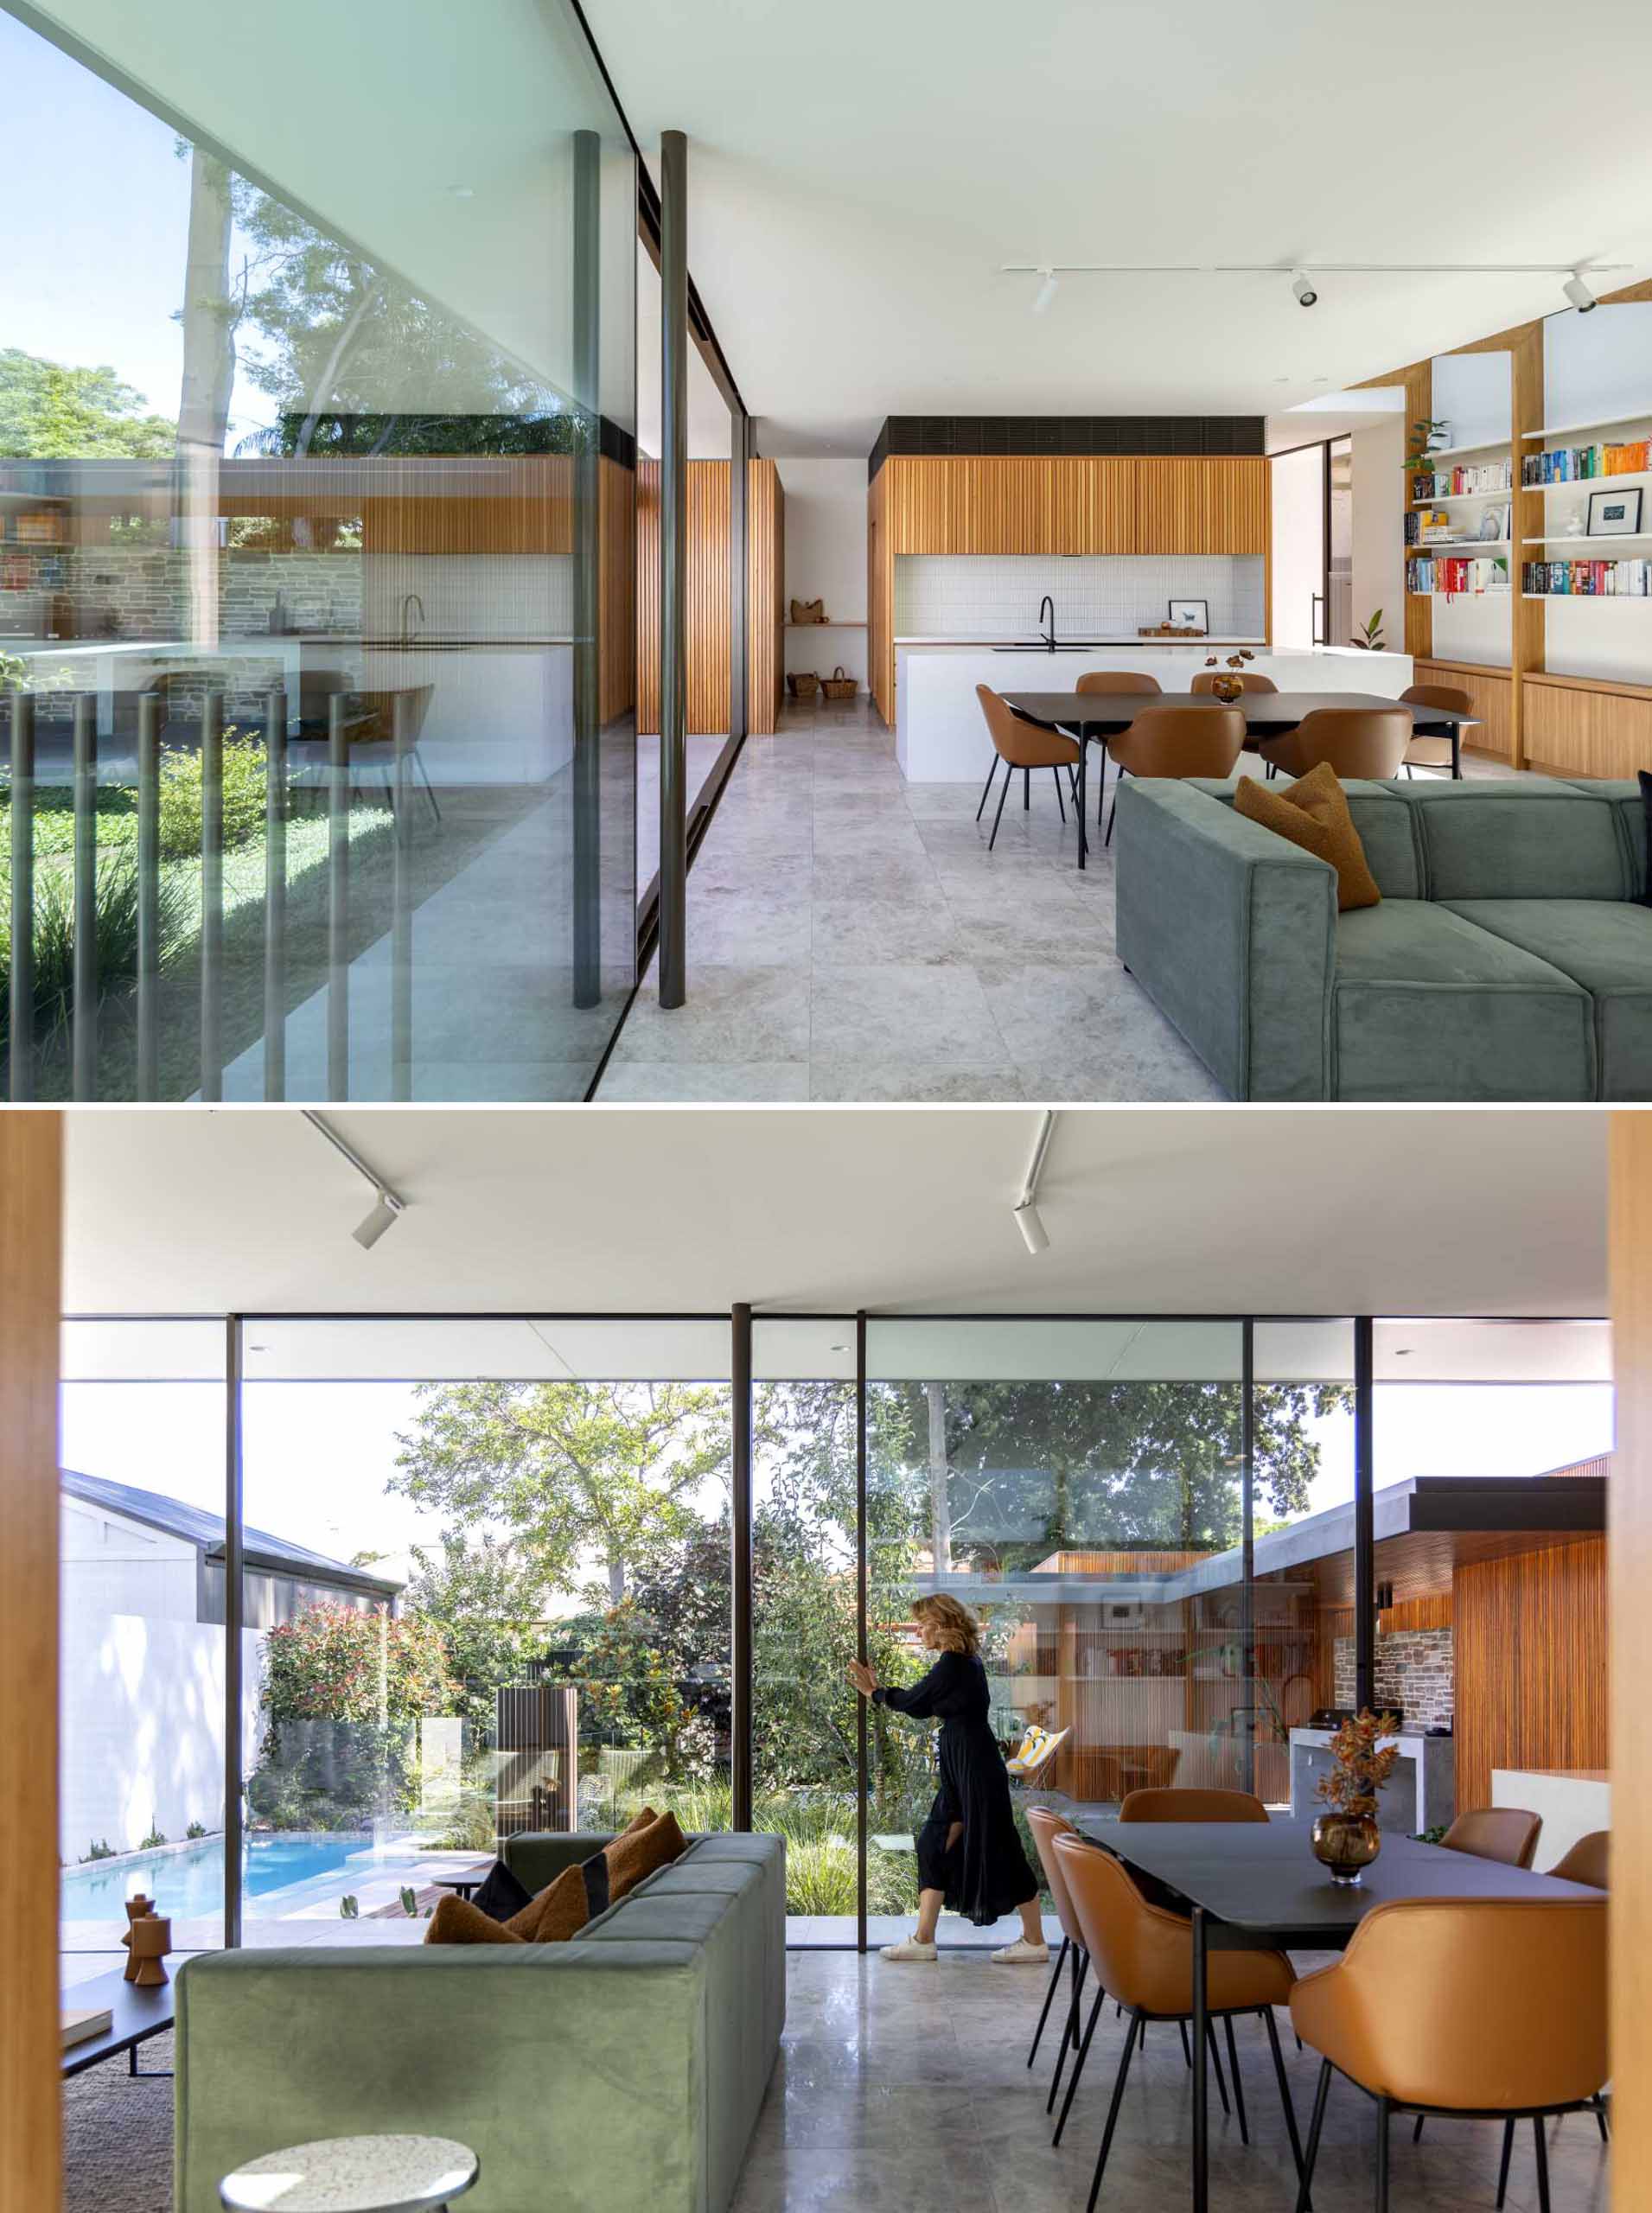 An open-plan dining area separates the kitchen from the living room, while 9-foot (3m) sliding glass doors connect the interior and exterior spaces.